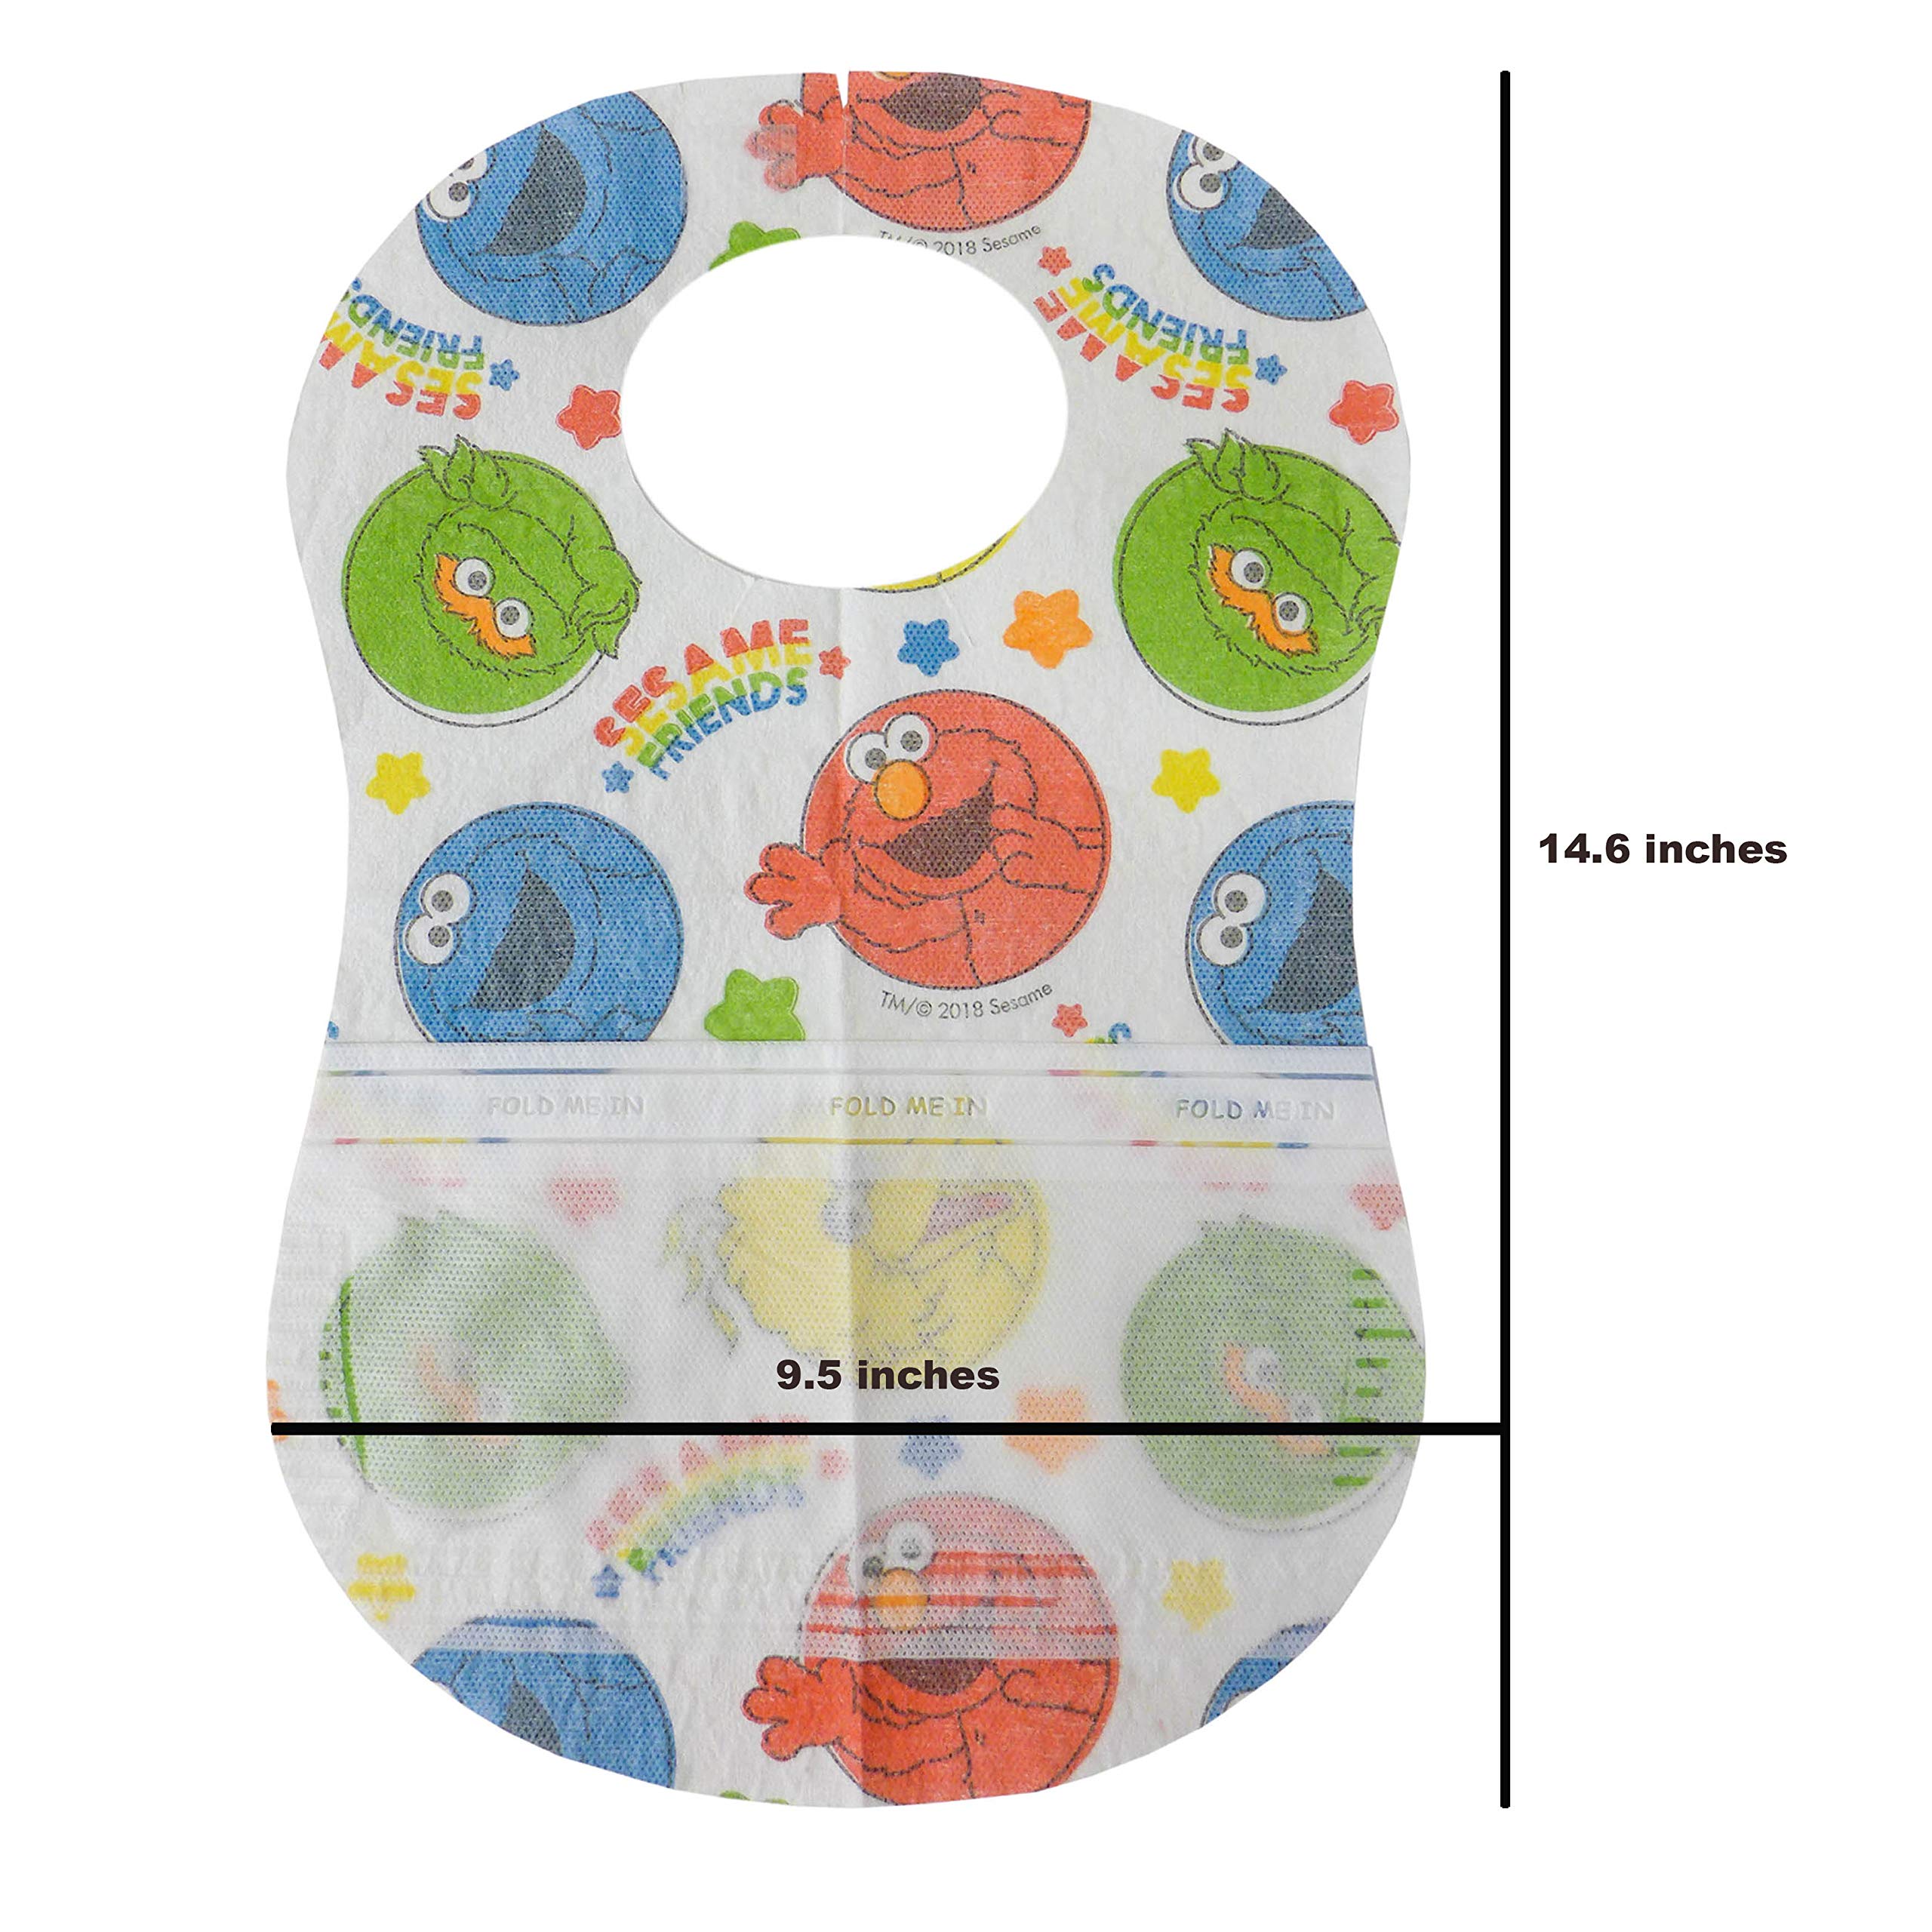 Bibsters Sesame Street Large Disposable Bibs with Patented Crumb-Catcher, Leakproof Liner, and Reusable Fastener -Age 6 Months and Up 32 count (Pack of 1)